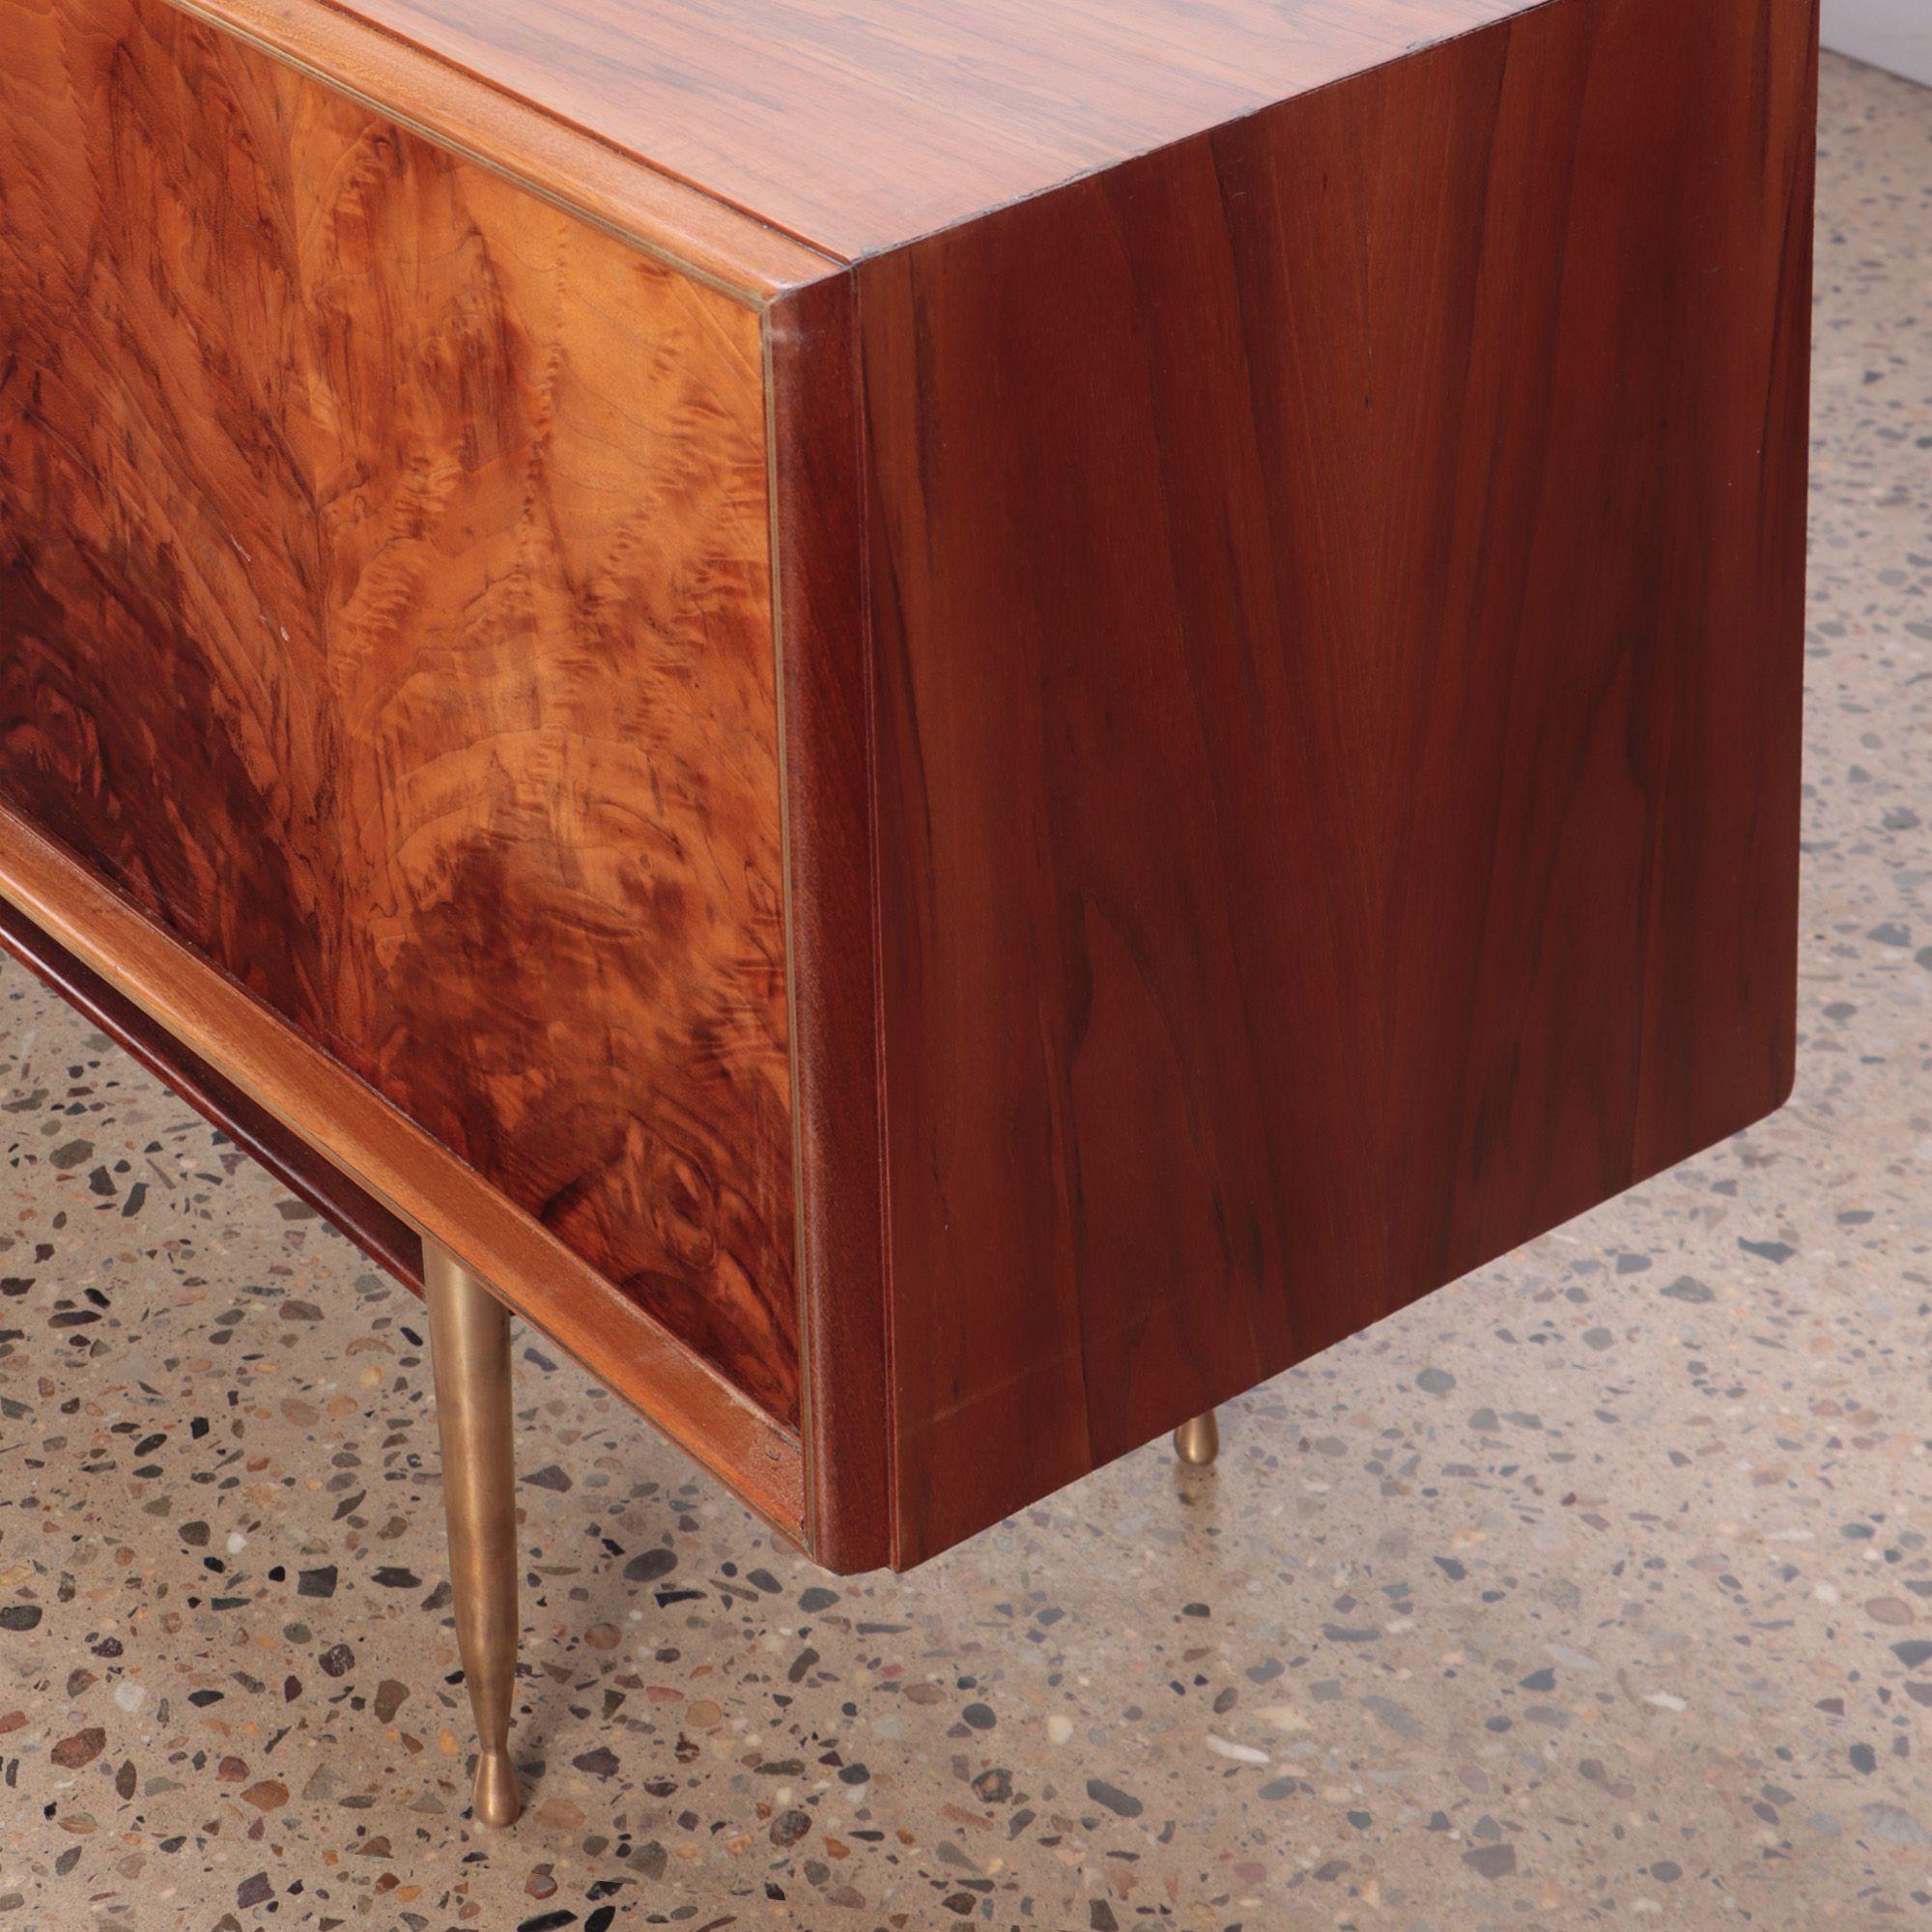 A Mid-Century Modern flame walnut sideboard having bronze trim and feet C 1960. The credenza features three central drawers flanked by two sets of doors for ample storage. Very unique exotic veneers.